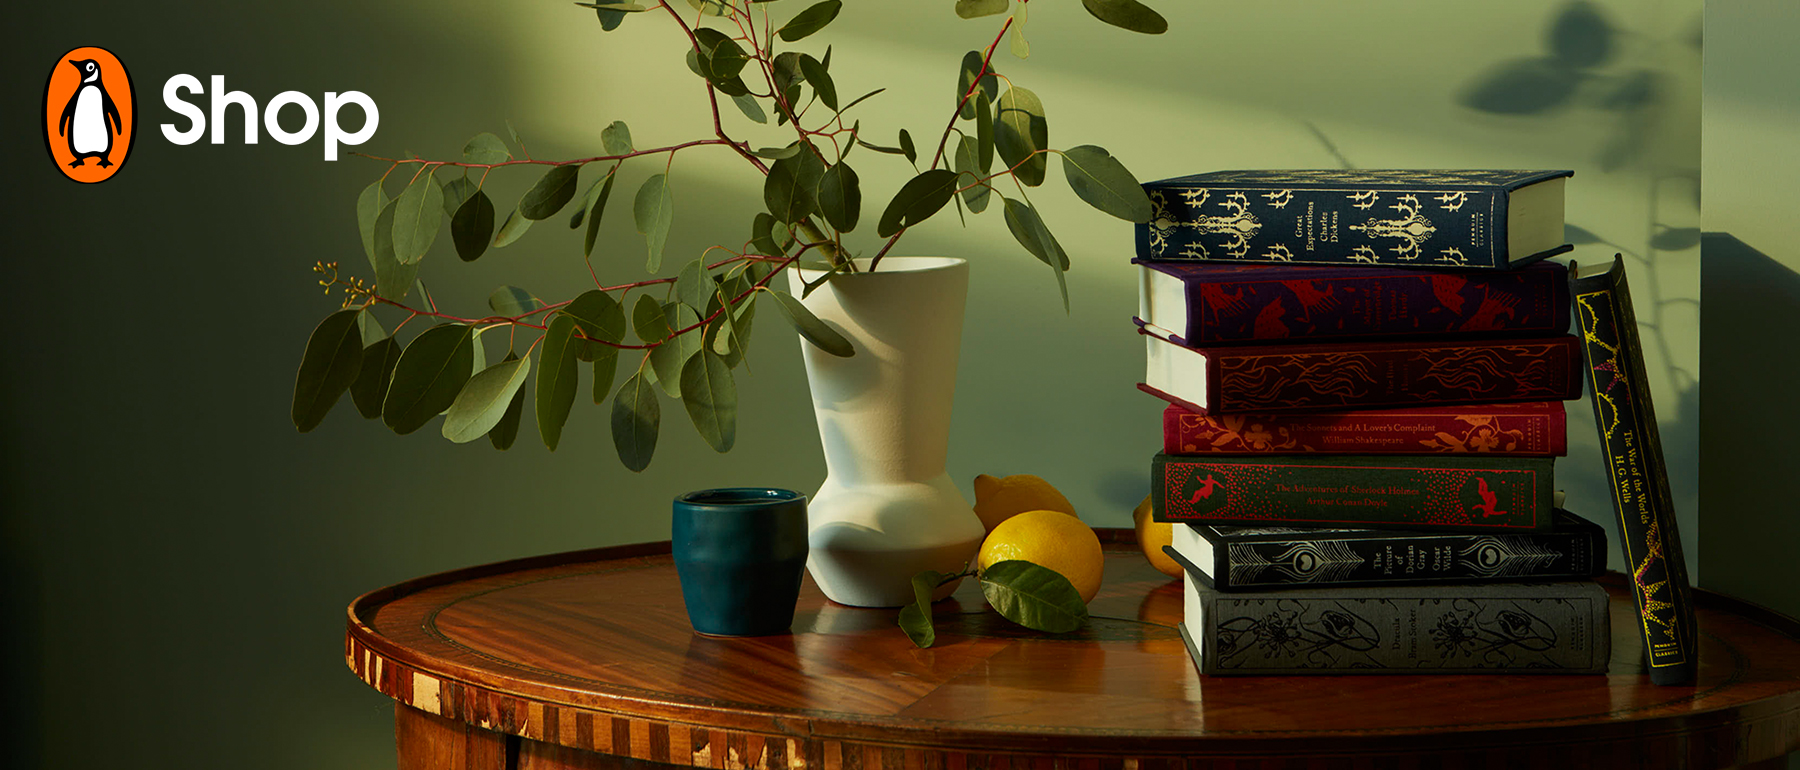 A stack of Clothbound Classics on bedside table with vase and lemon